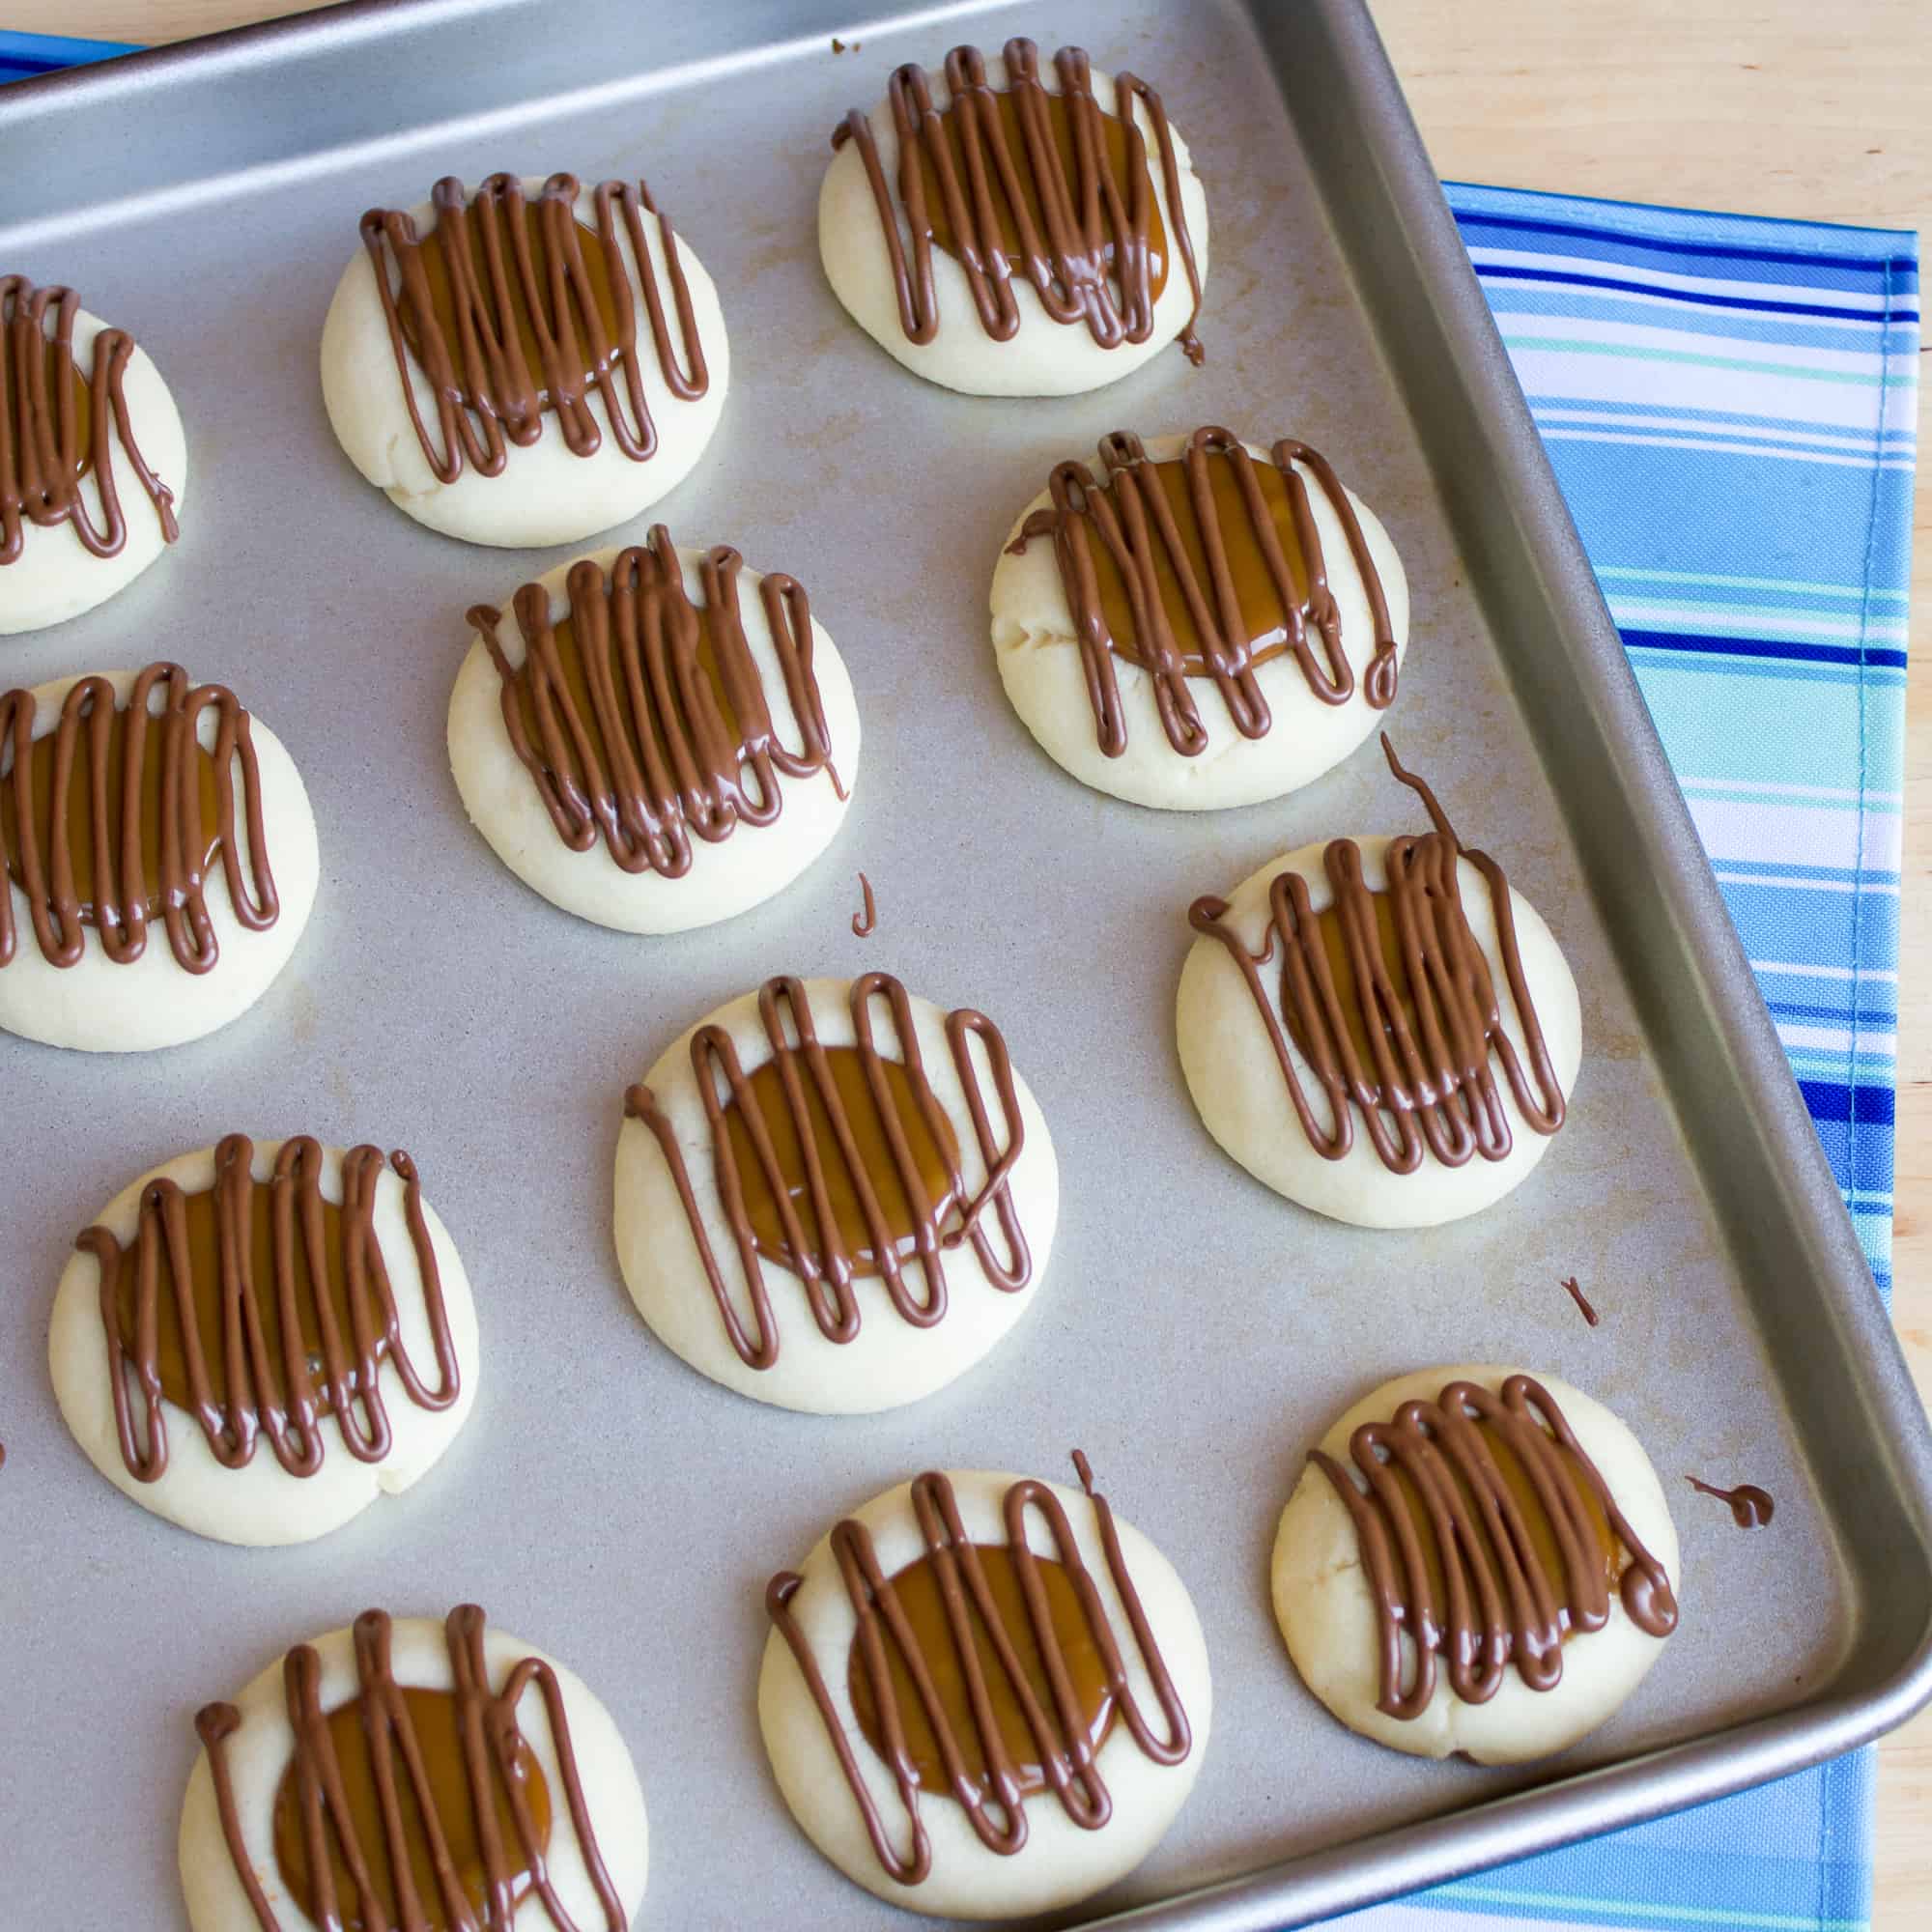 A recipe for a shortbread thumbprint cookie filled with dulce de leche and drizzled with melted chocolate. Tastes similar to a Twix candy bar with the caramel and chocolate. 